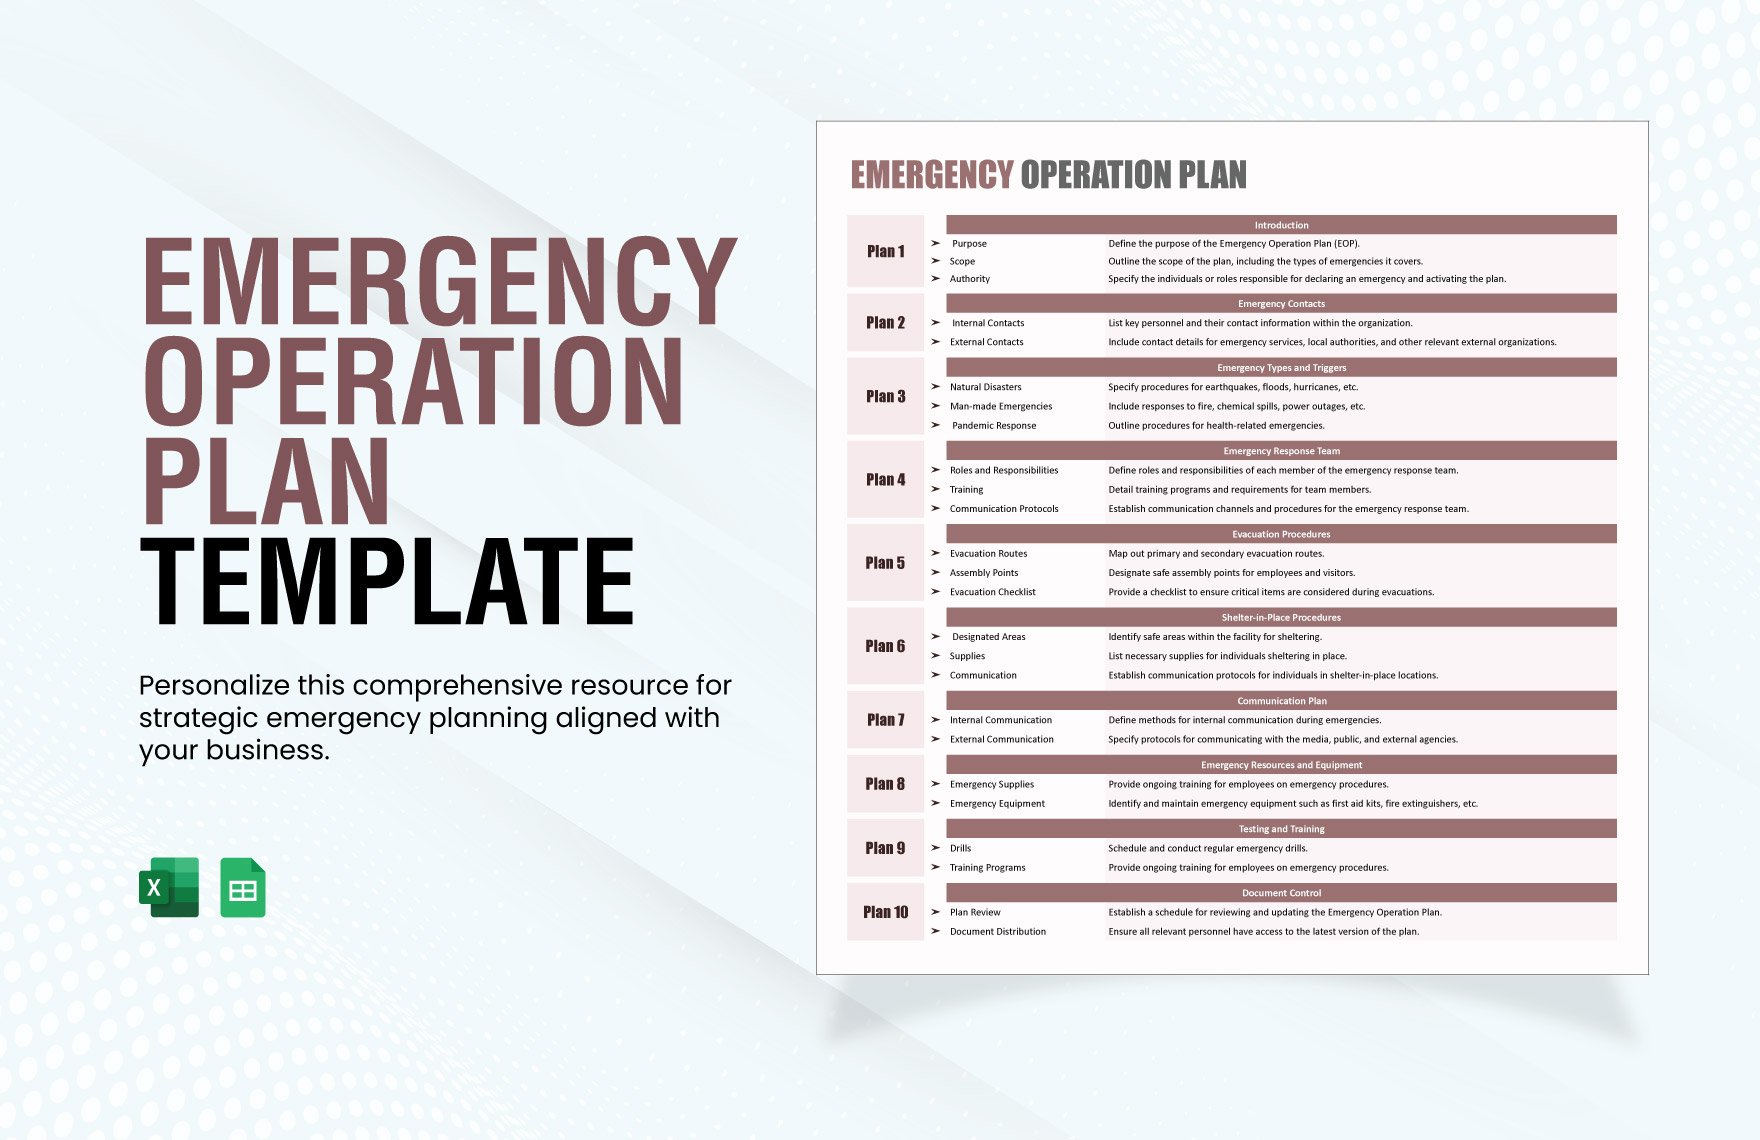 Emergency Operation Plan Template in Excel, Google Sheets